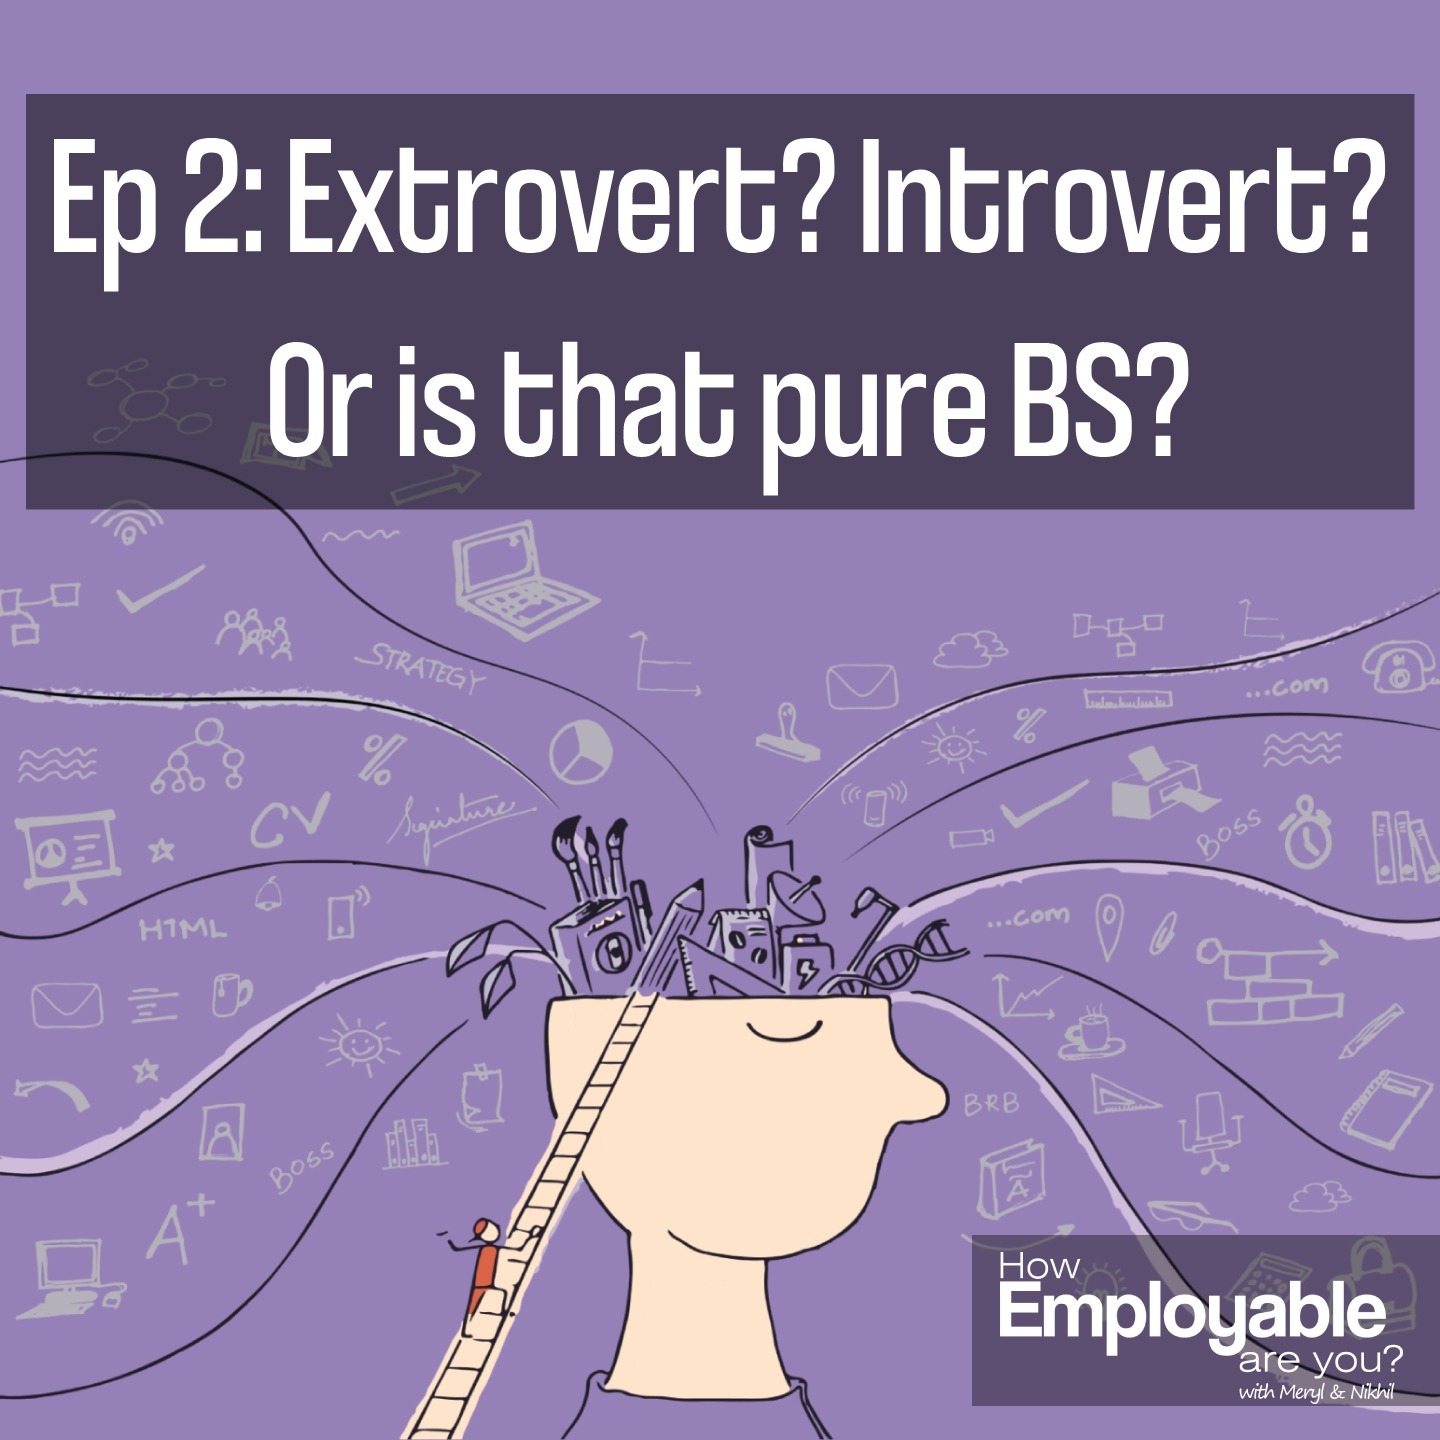 Ep 2: Extrovert? Introvert? Or is that pure BS?